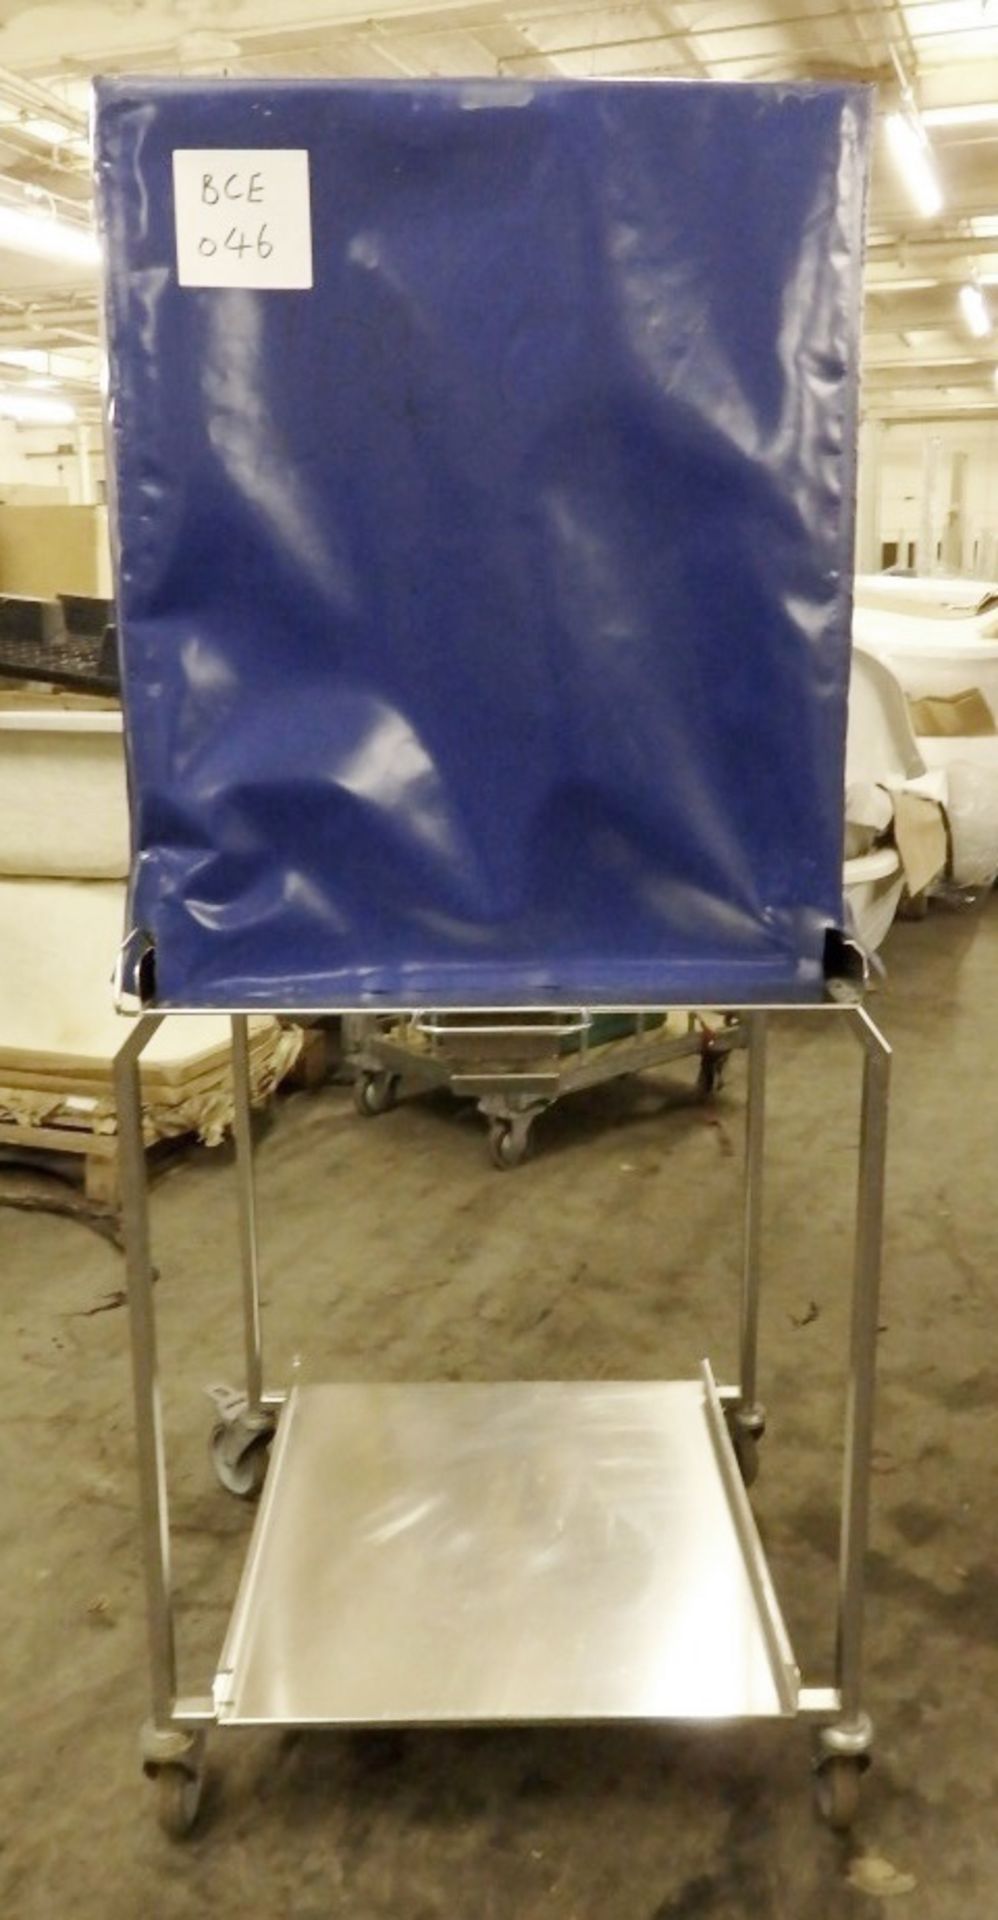 1 x Stainless Steel Plate Rack / Trolley With Thermal Cover -  Only Used Once Before  - 50 Plate - Image 2 of 4